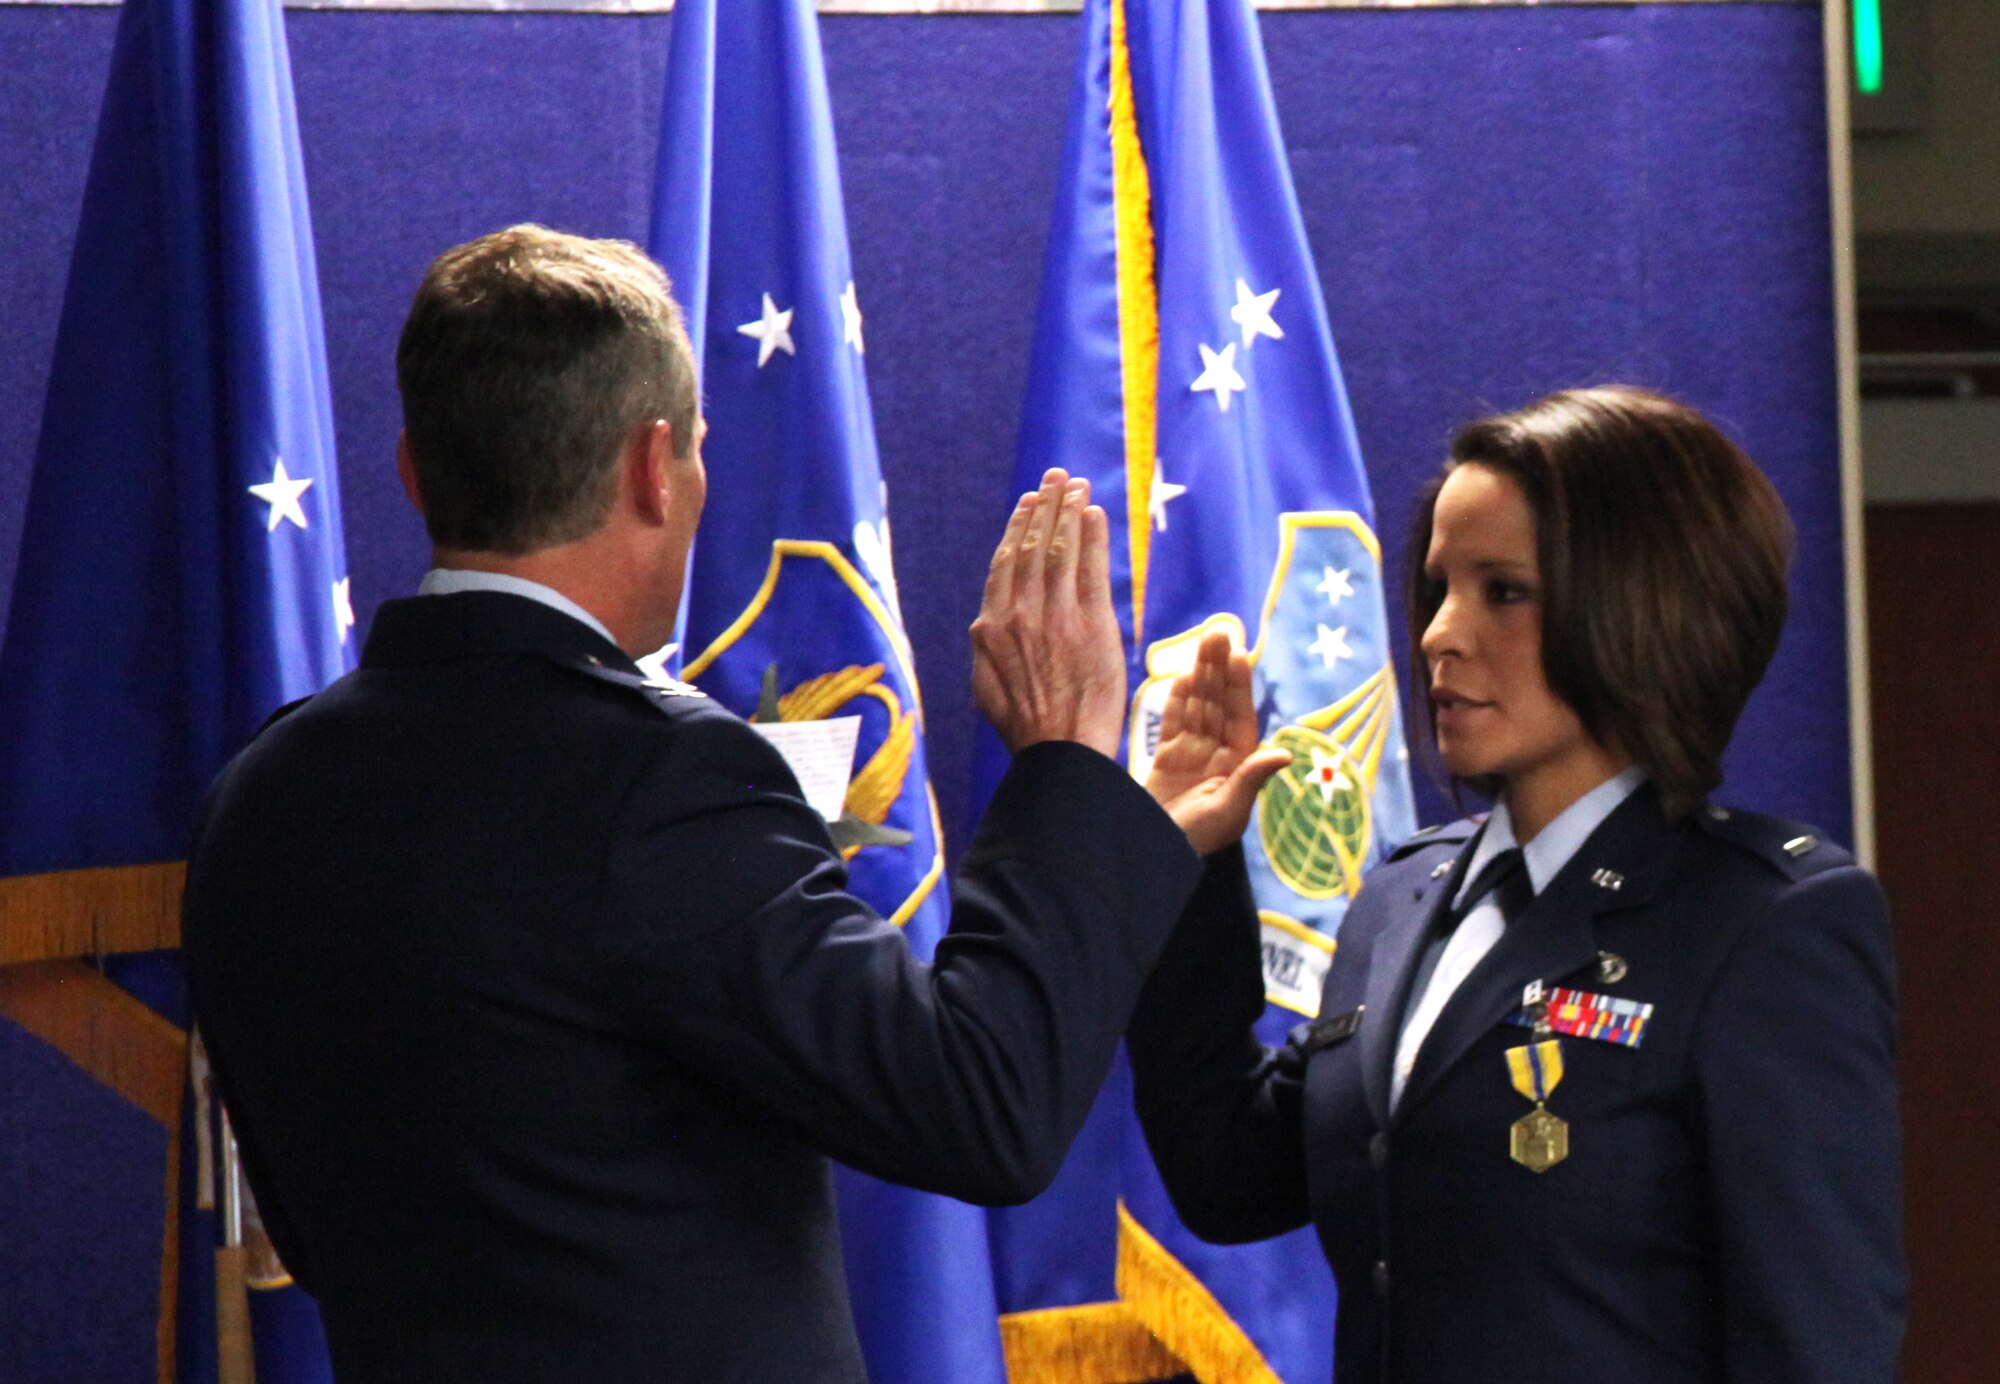 1st Lt. Iris Morales, Medical Service Corps officer and former Air Reserve Personnel Center contact center noncommissioned officer, is administered the Oath of Office by Col. Pat Hayes, ARPC Total Force Service Center director, during a commissioning ceremony held Jan. 30, 2015, on Buckley Air Force Base, Colo. (U.S. Air Force photo/Tech. Sgt. Rob Hazelett)